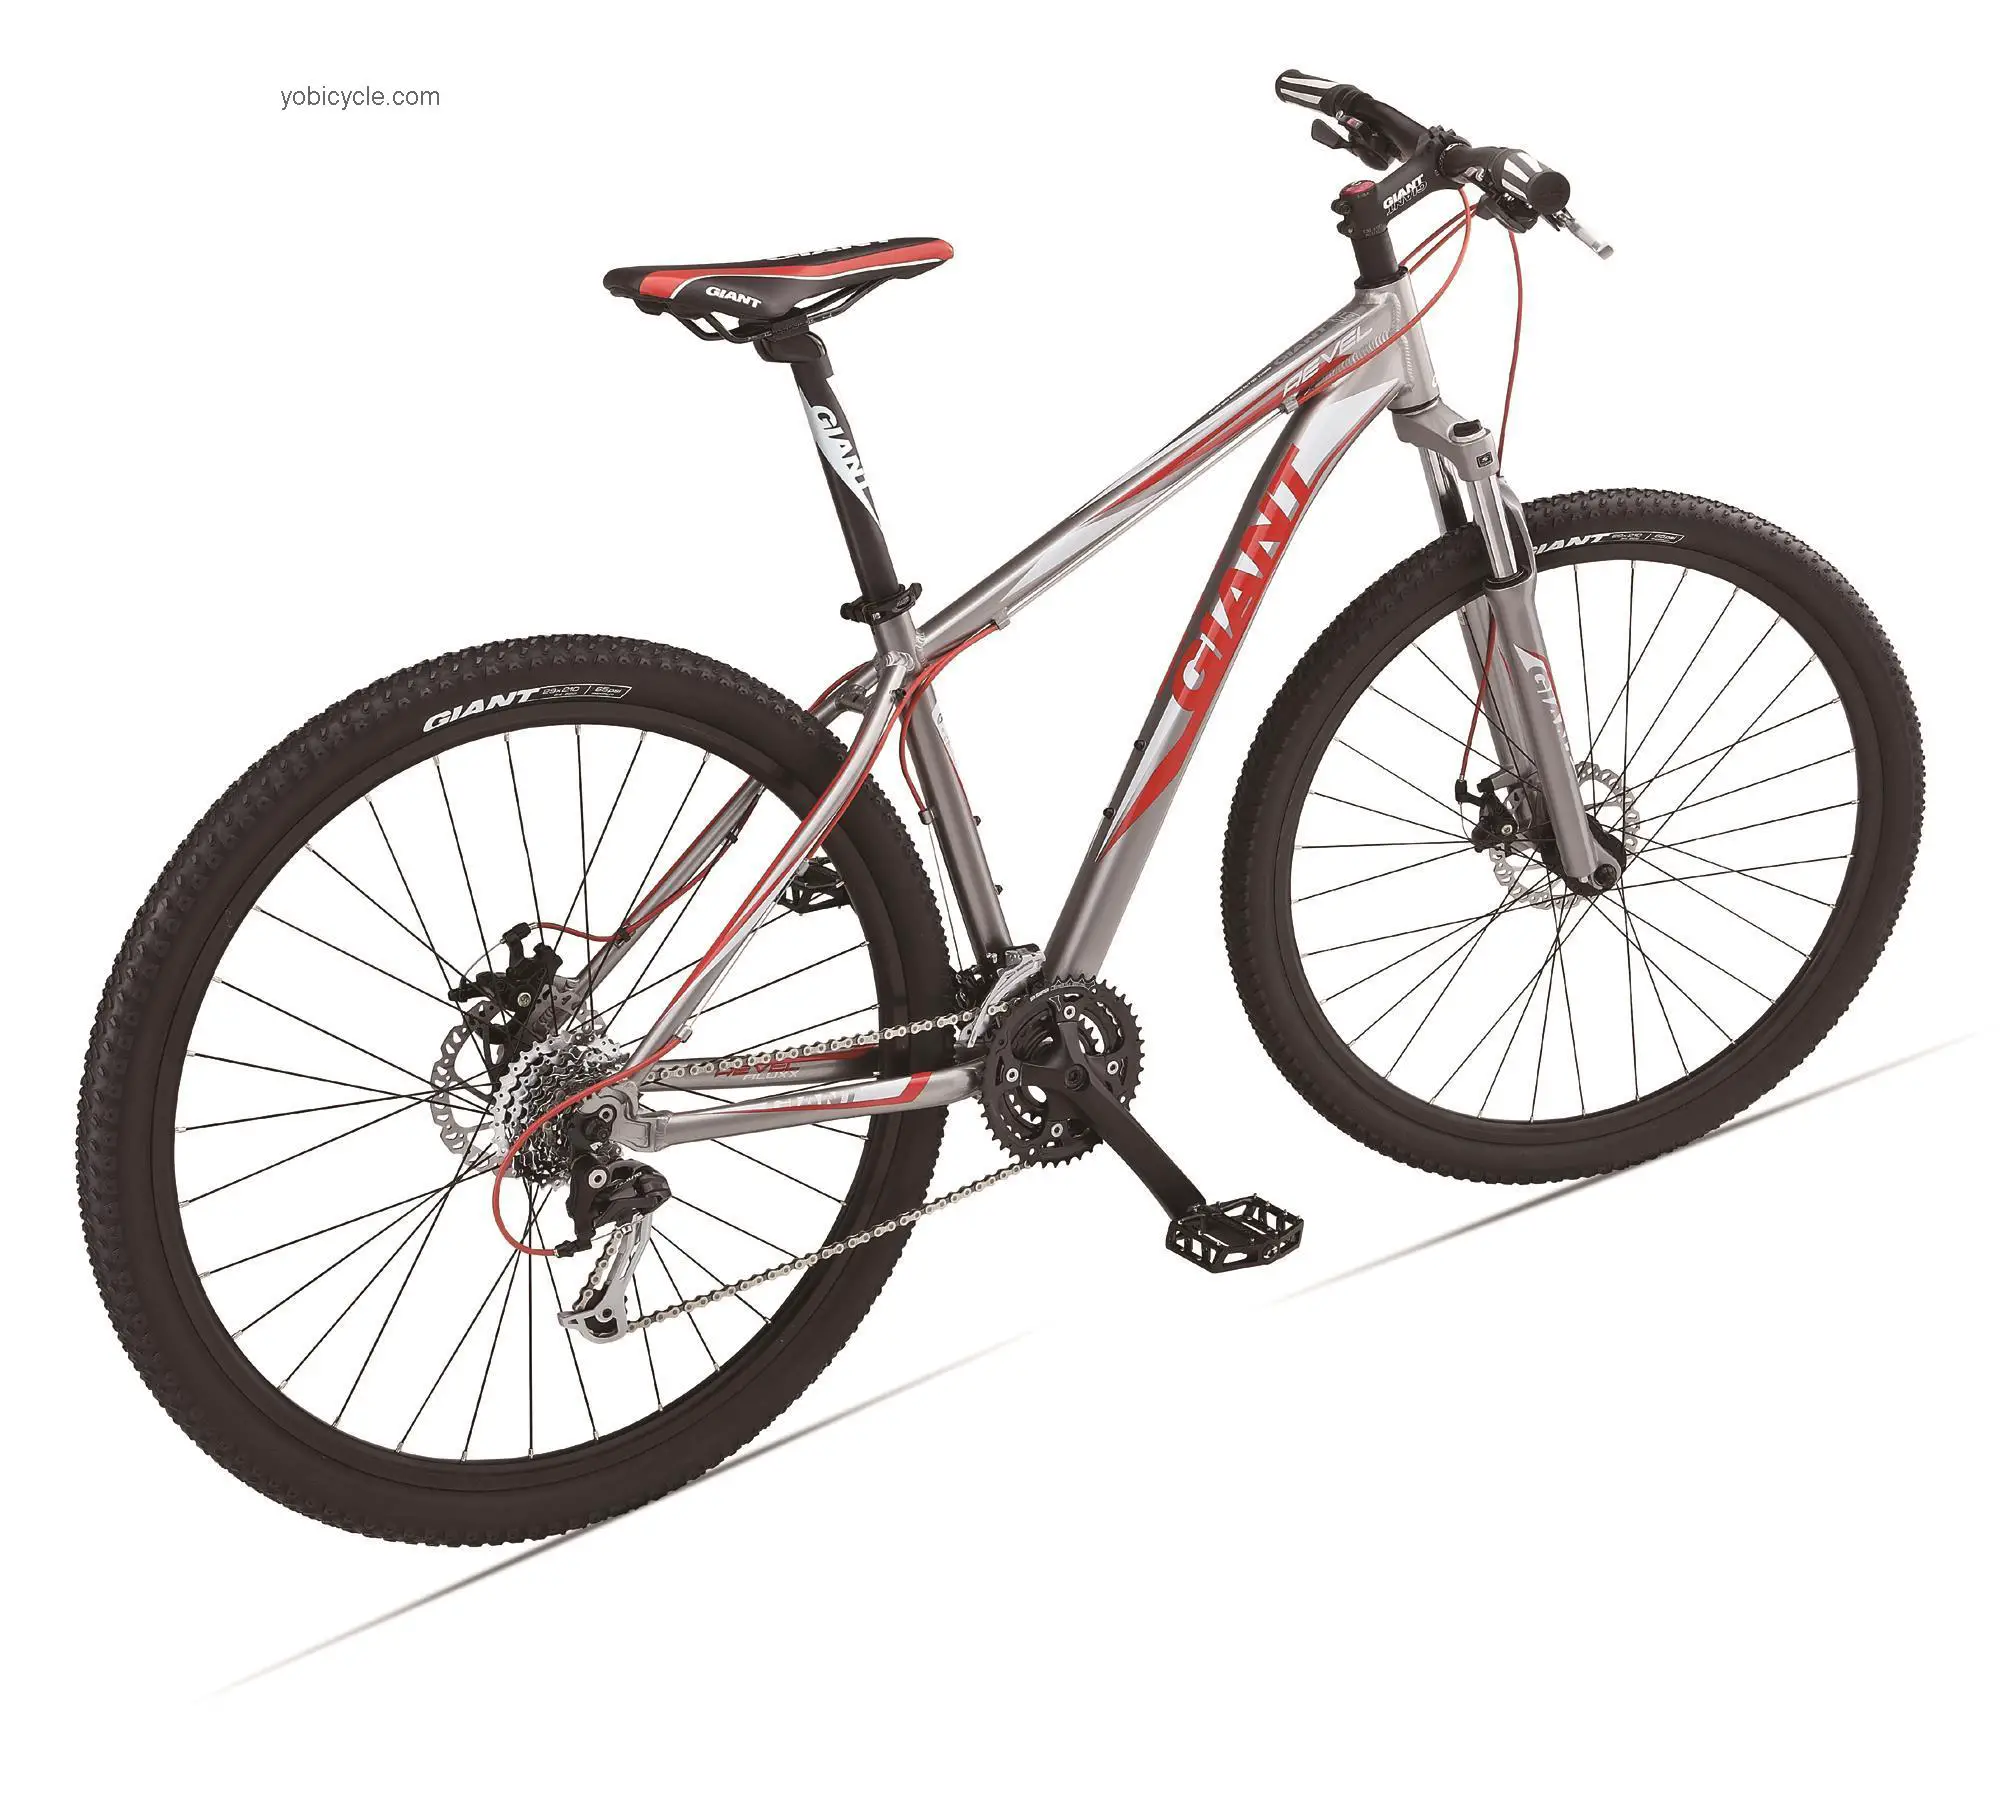 Giant Revel 29er 1 2013 comparison online with competitors